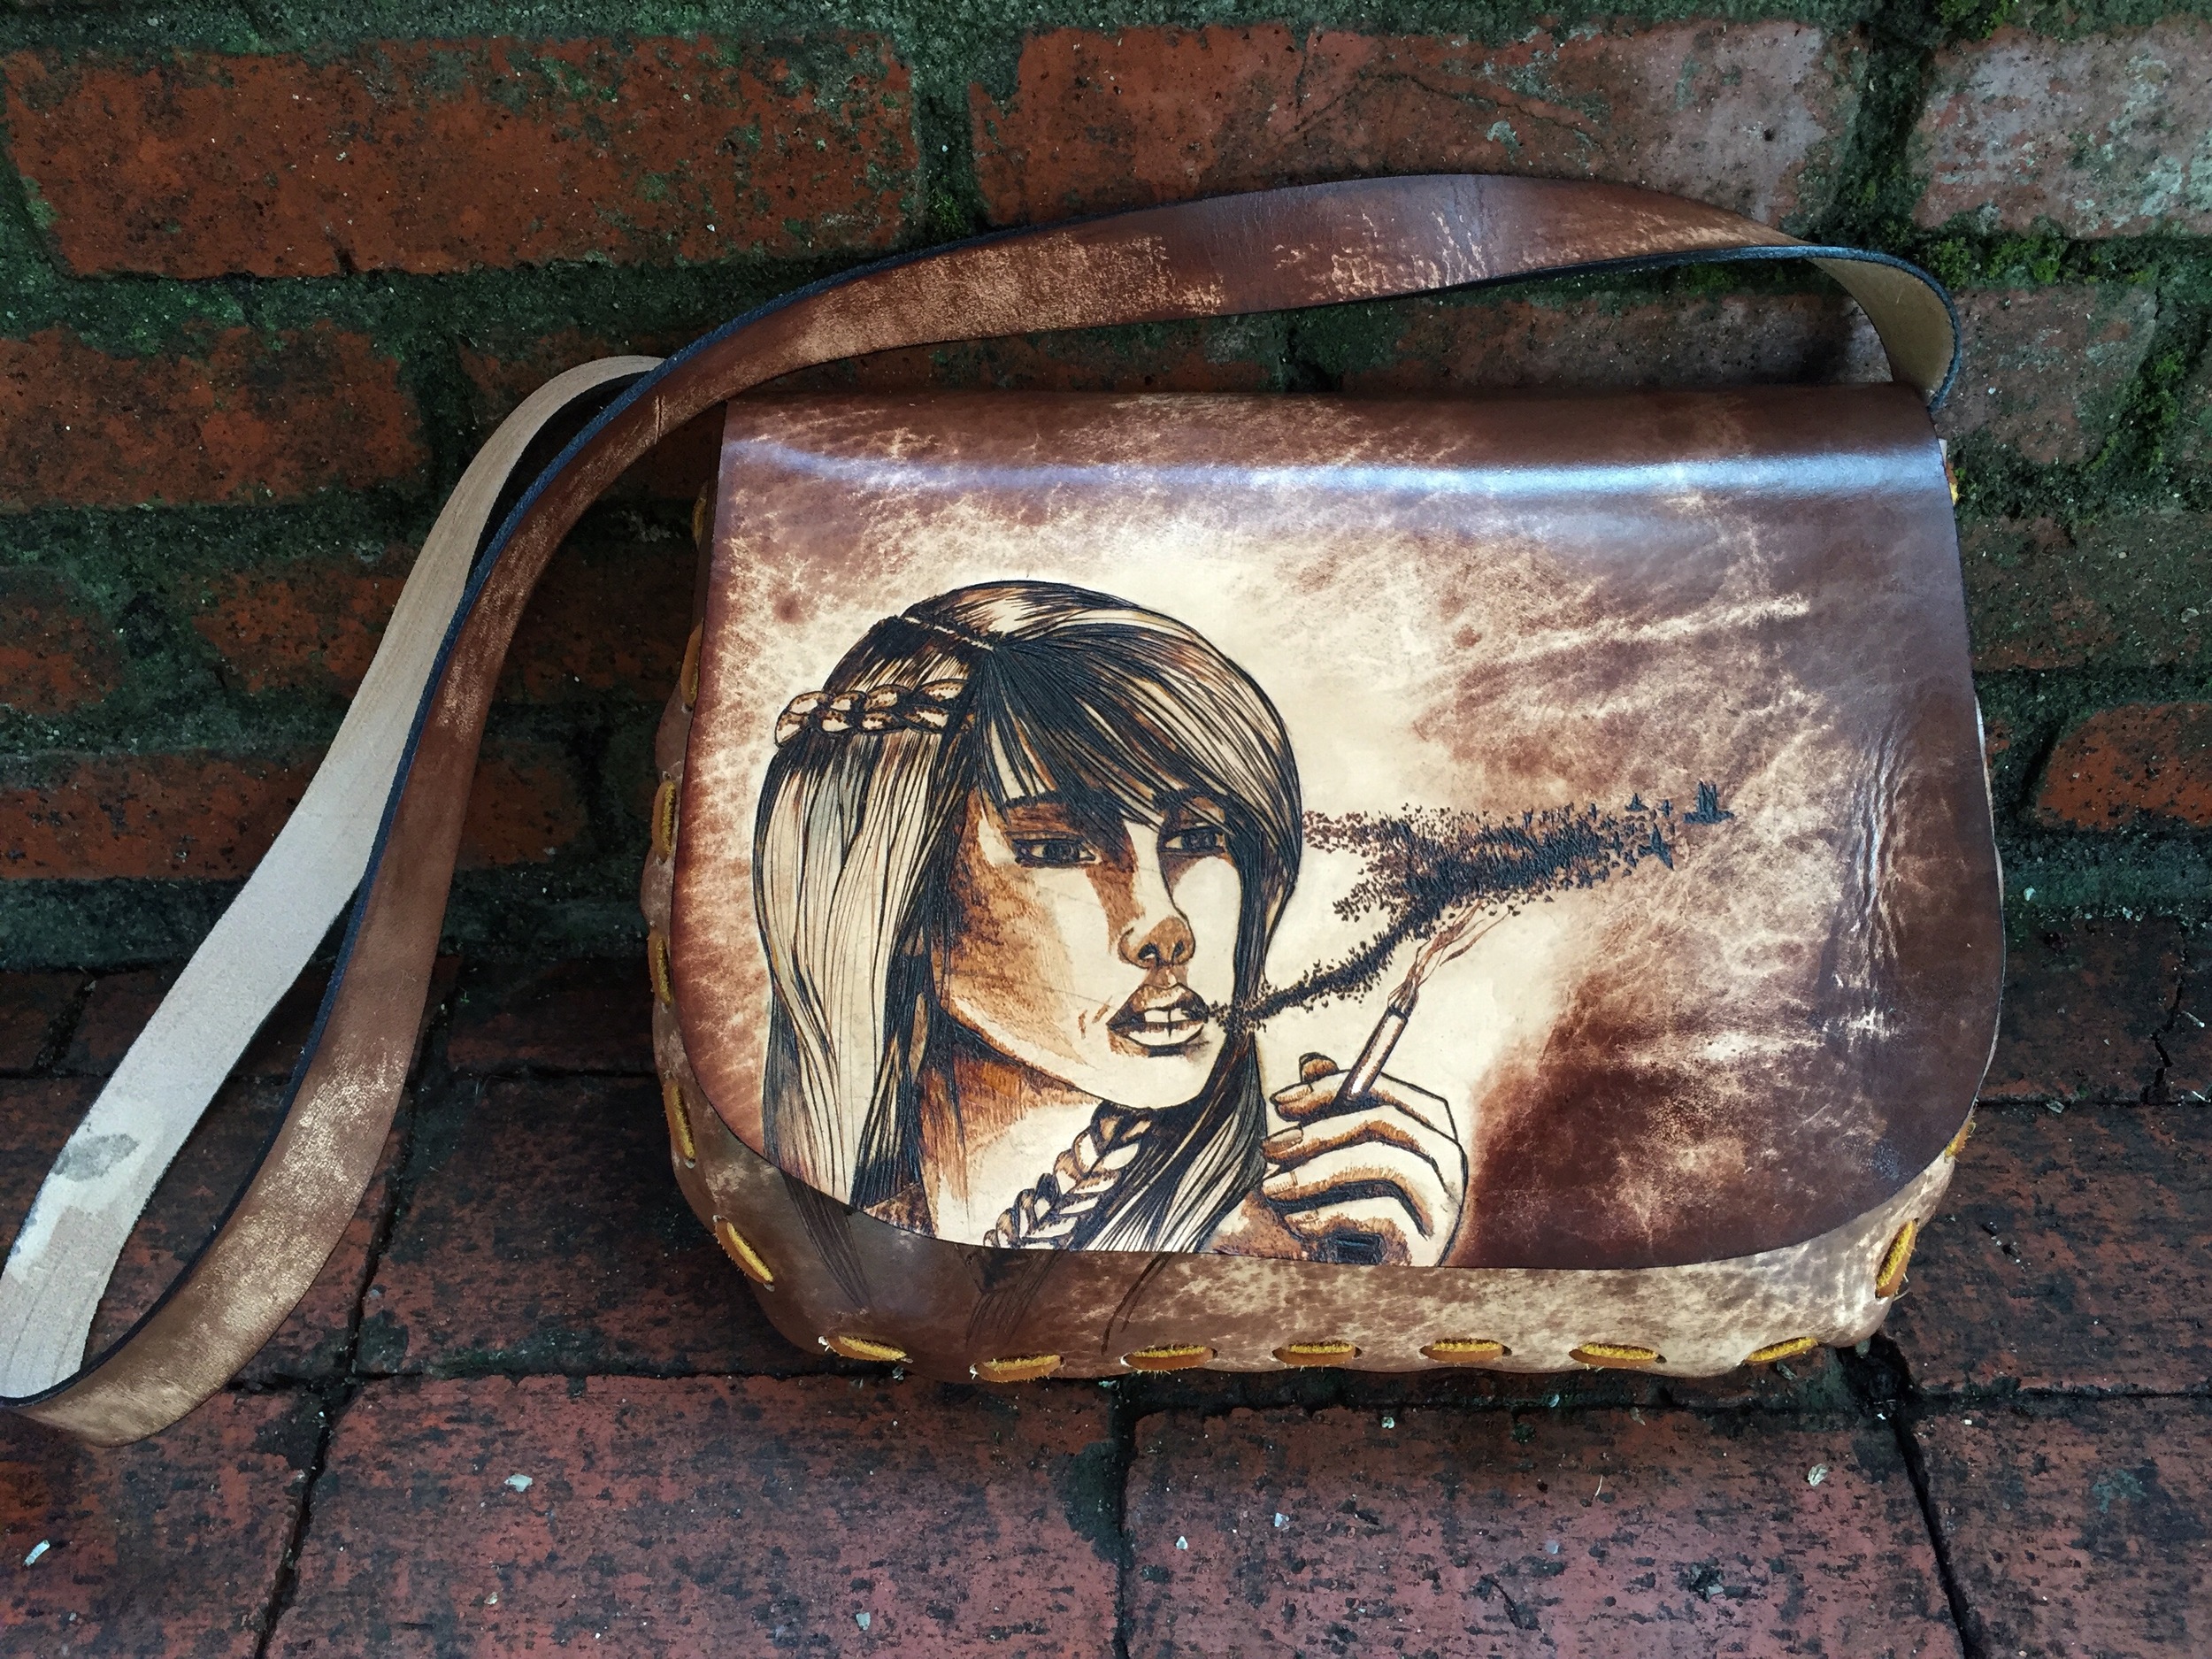 PurseBlog Asks: Would You Ever Have One of Your Bags Custom